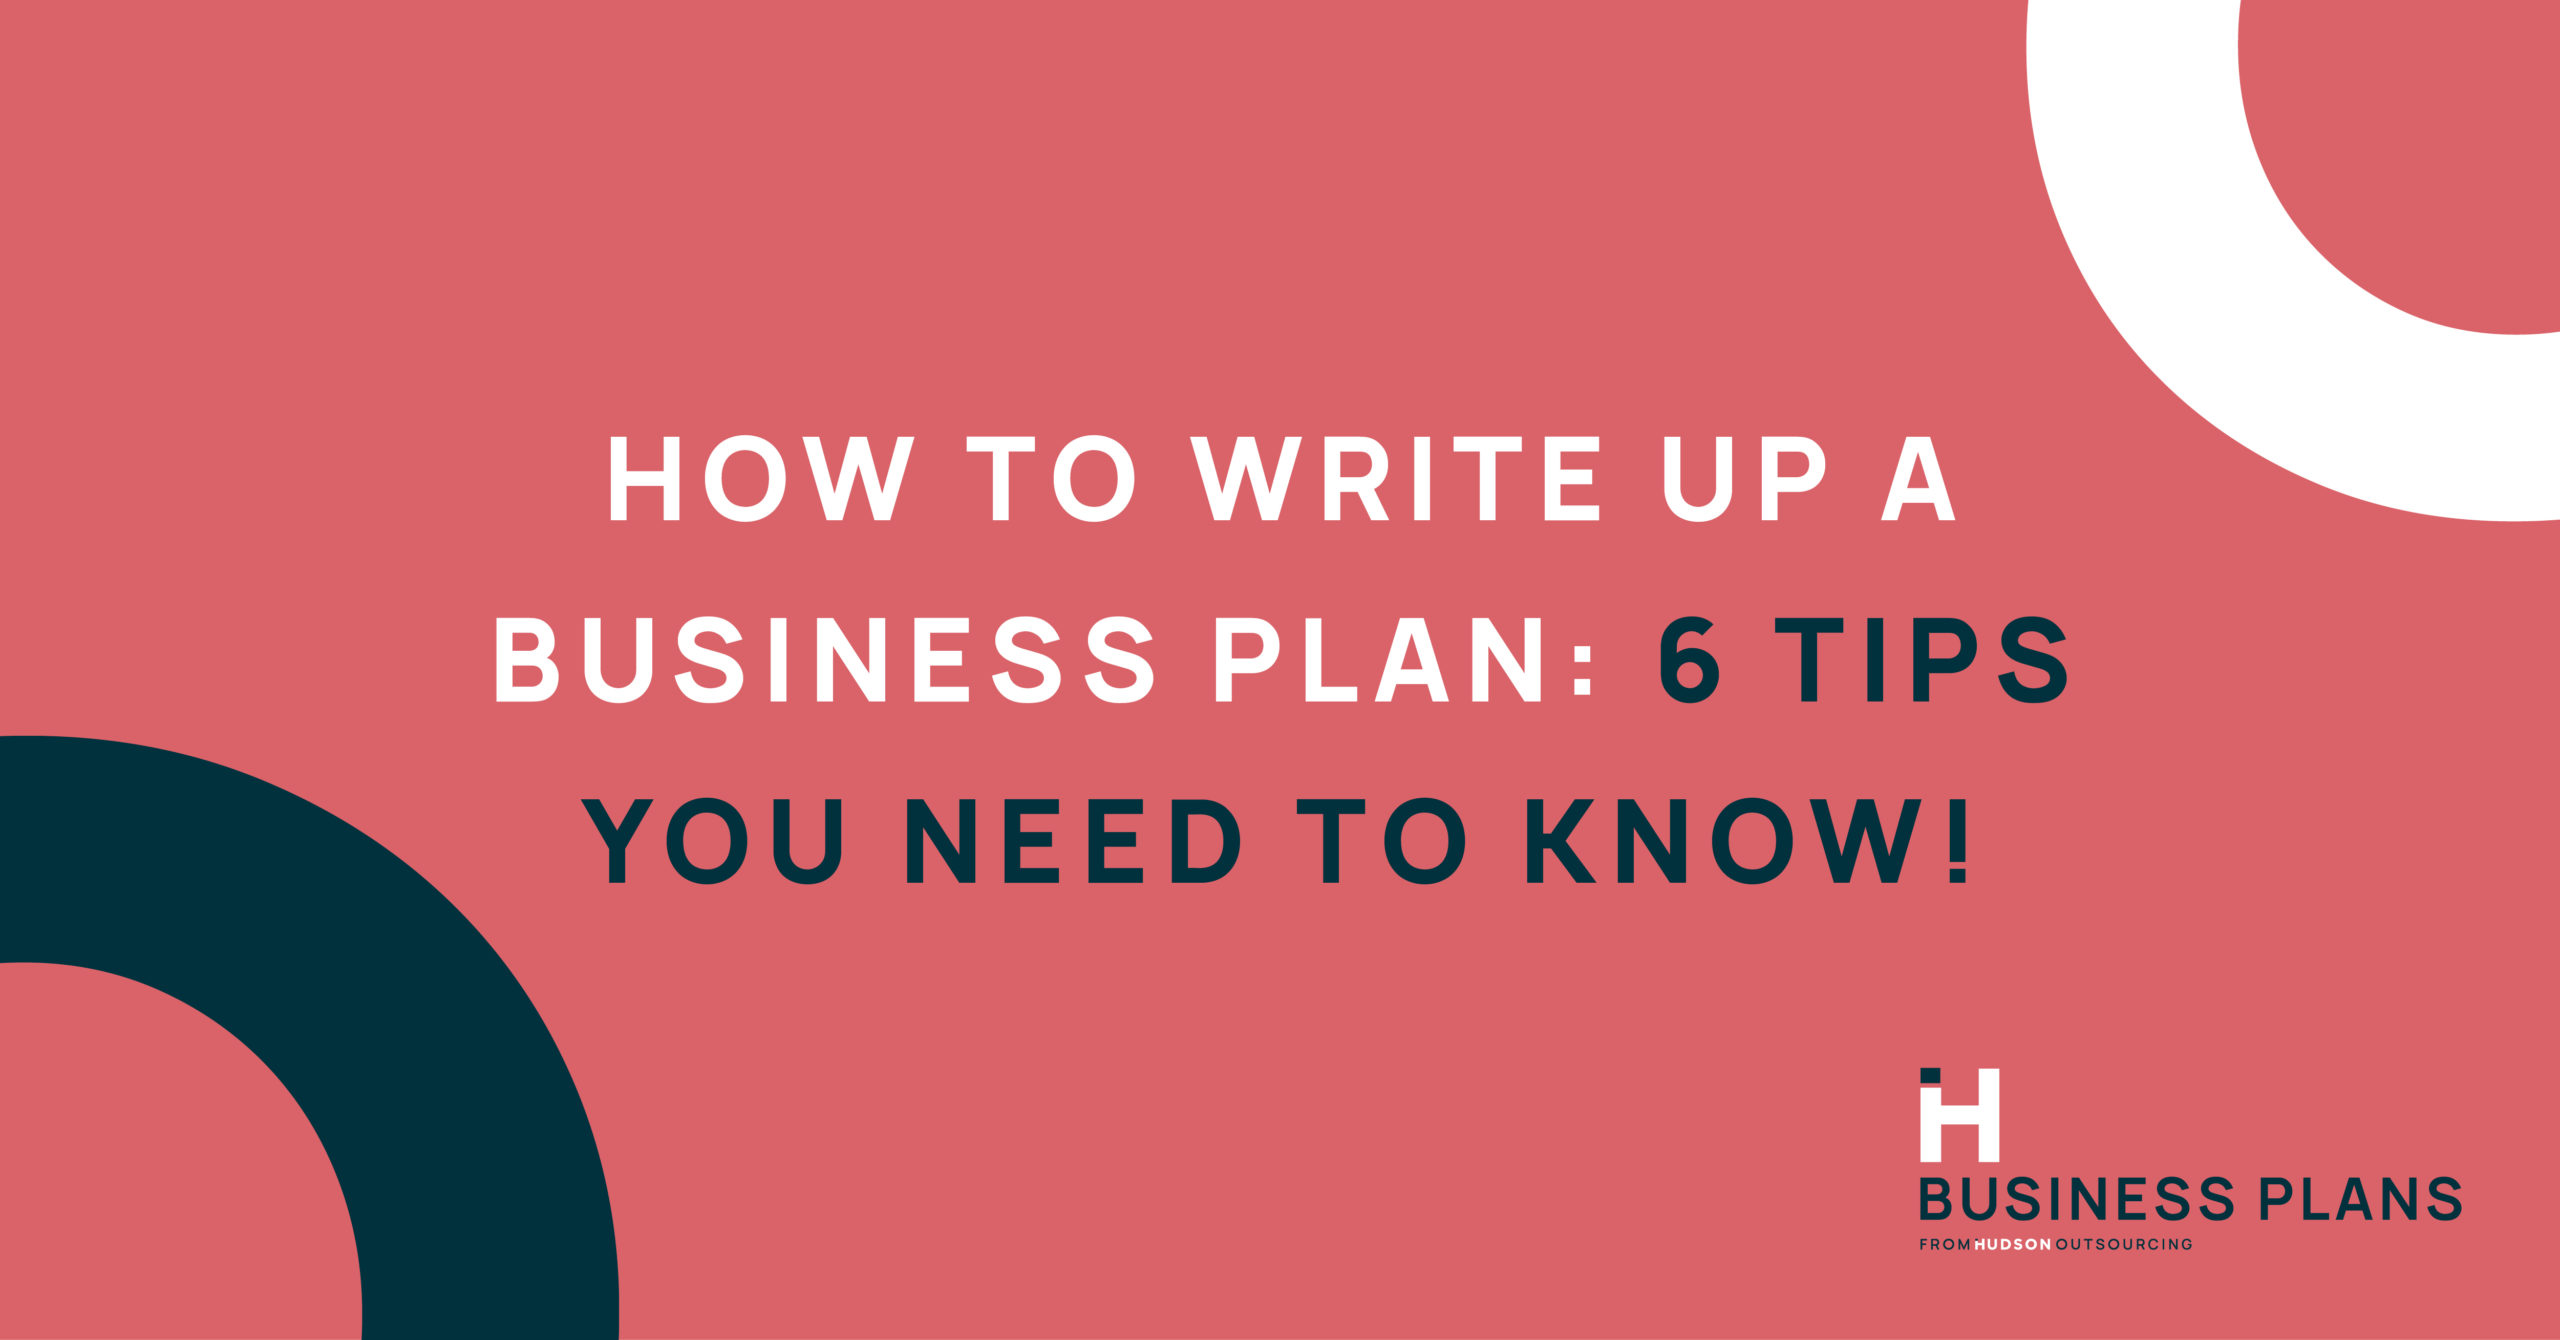 How to Write Up a Business Plan